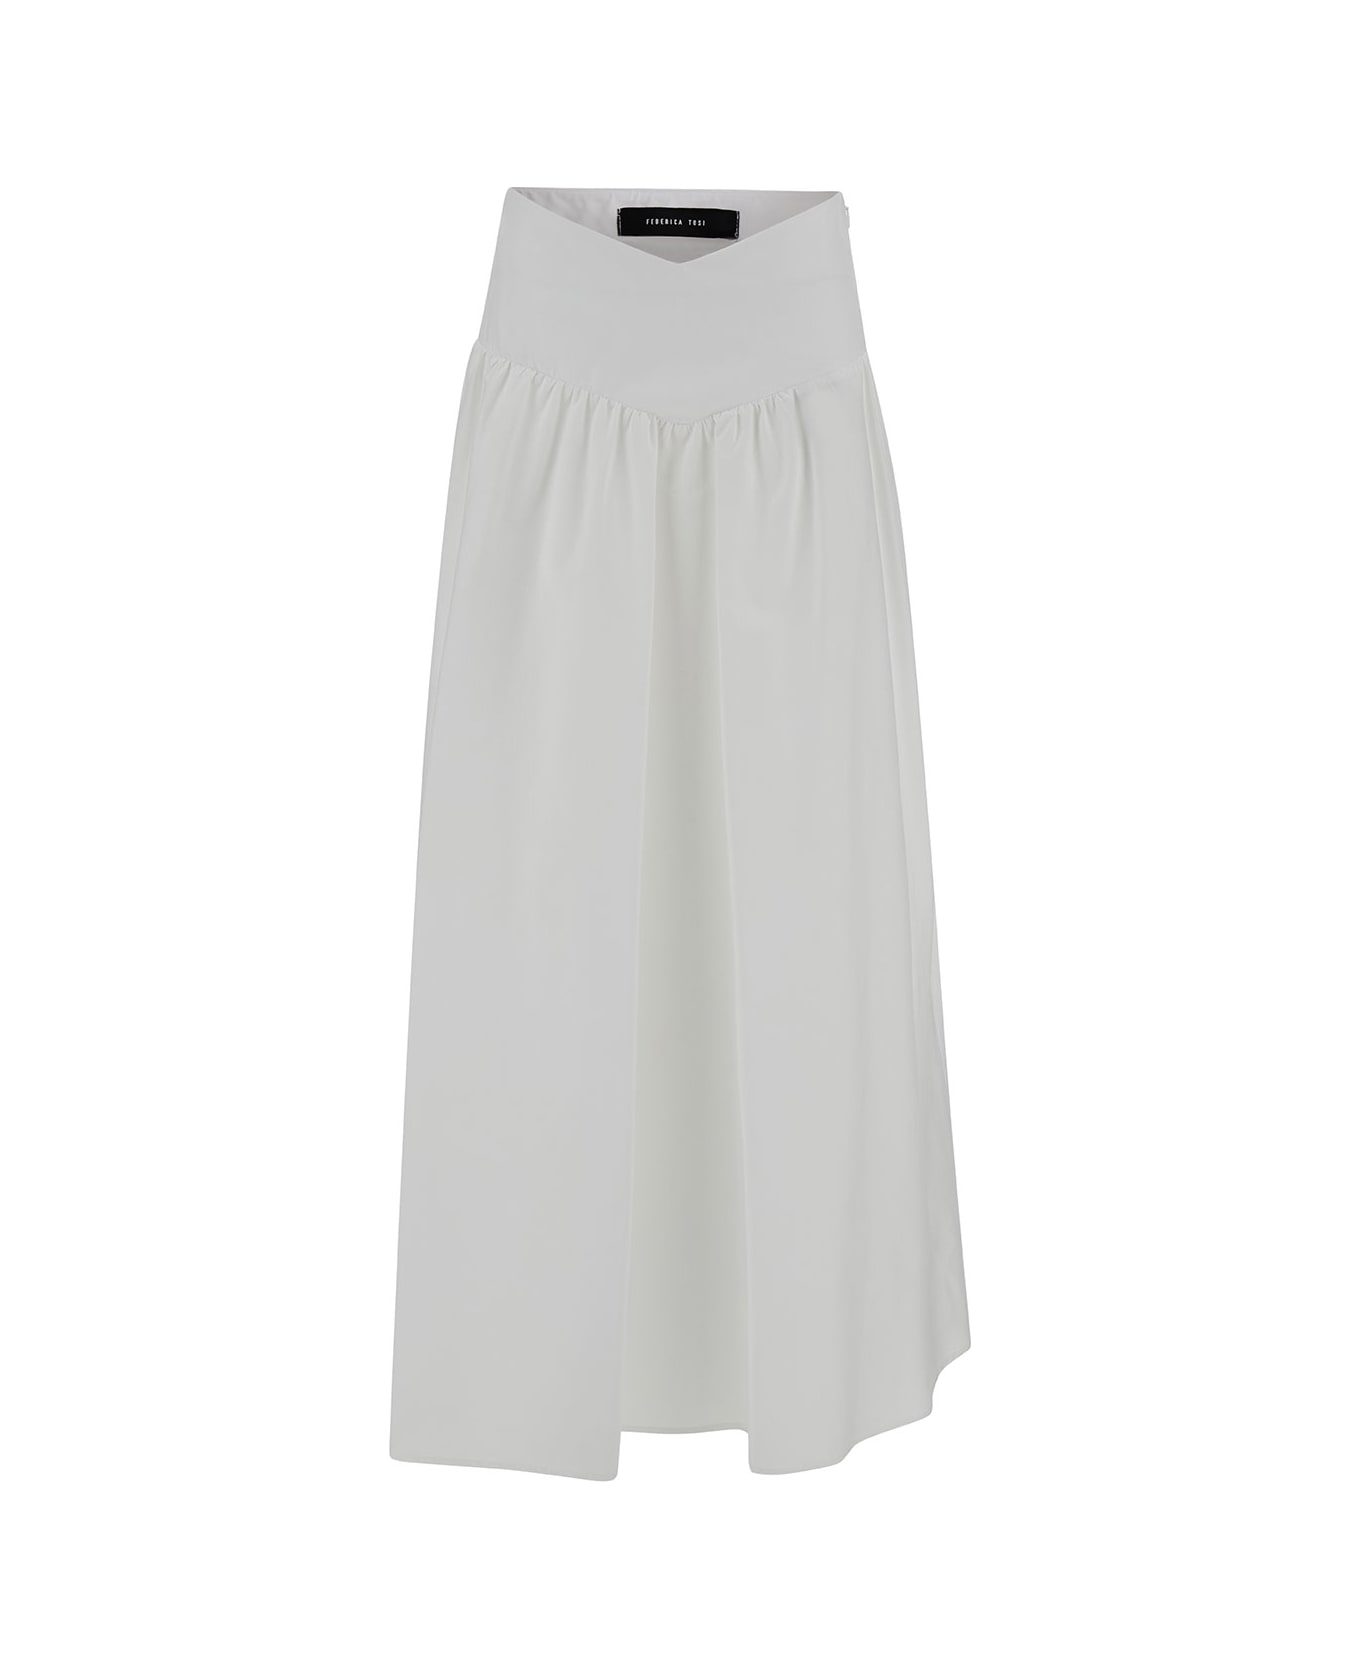 Federica Tosi Long White Pleated Skirt In Stretch Cotton Woman - White スカート